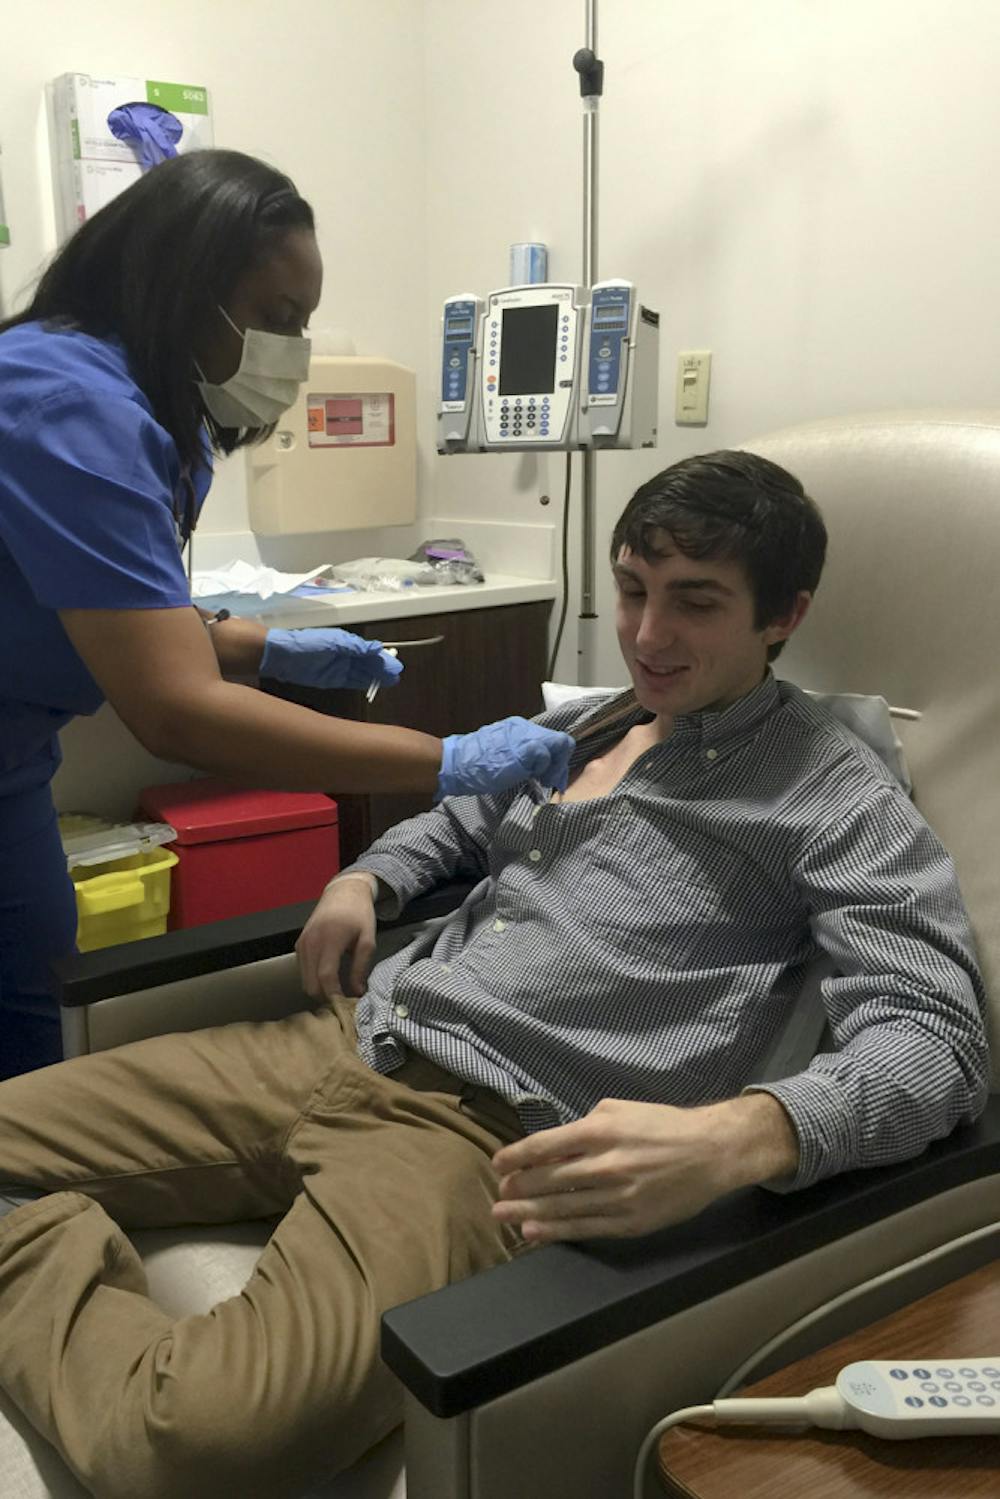 <p>Daniel Ellis, a 22-year-old UF alumnus who graduated with a degree in business administration, waits as a nurse sterilizes an IV port during his fifth round of chemotherapy. In early December, Ellis was diagnosed with Hodgkin’s lymphoma.</p>